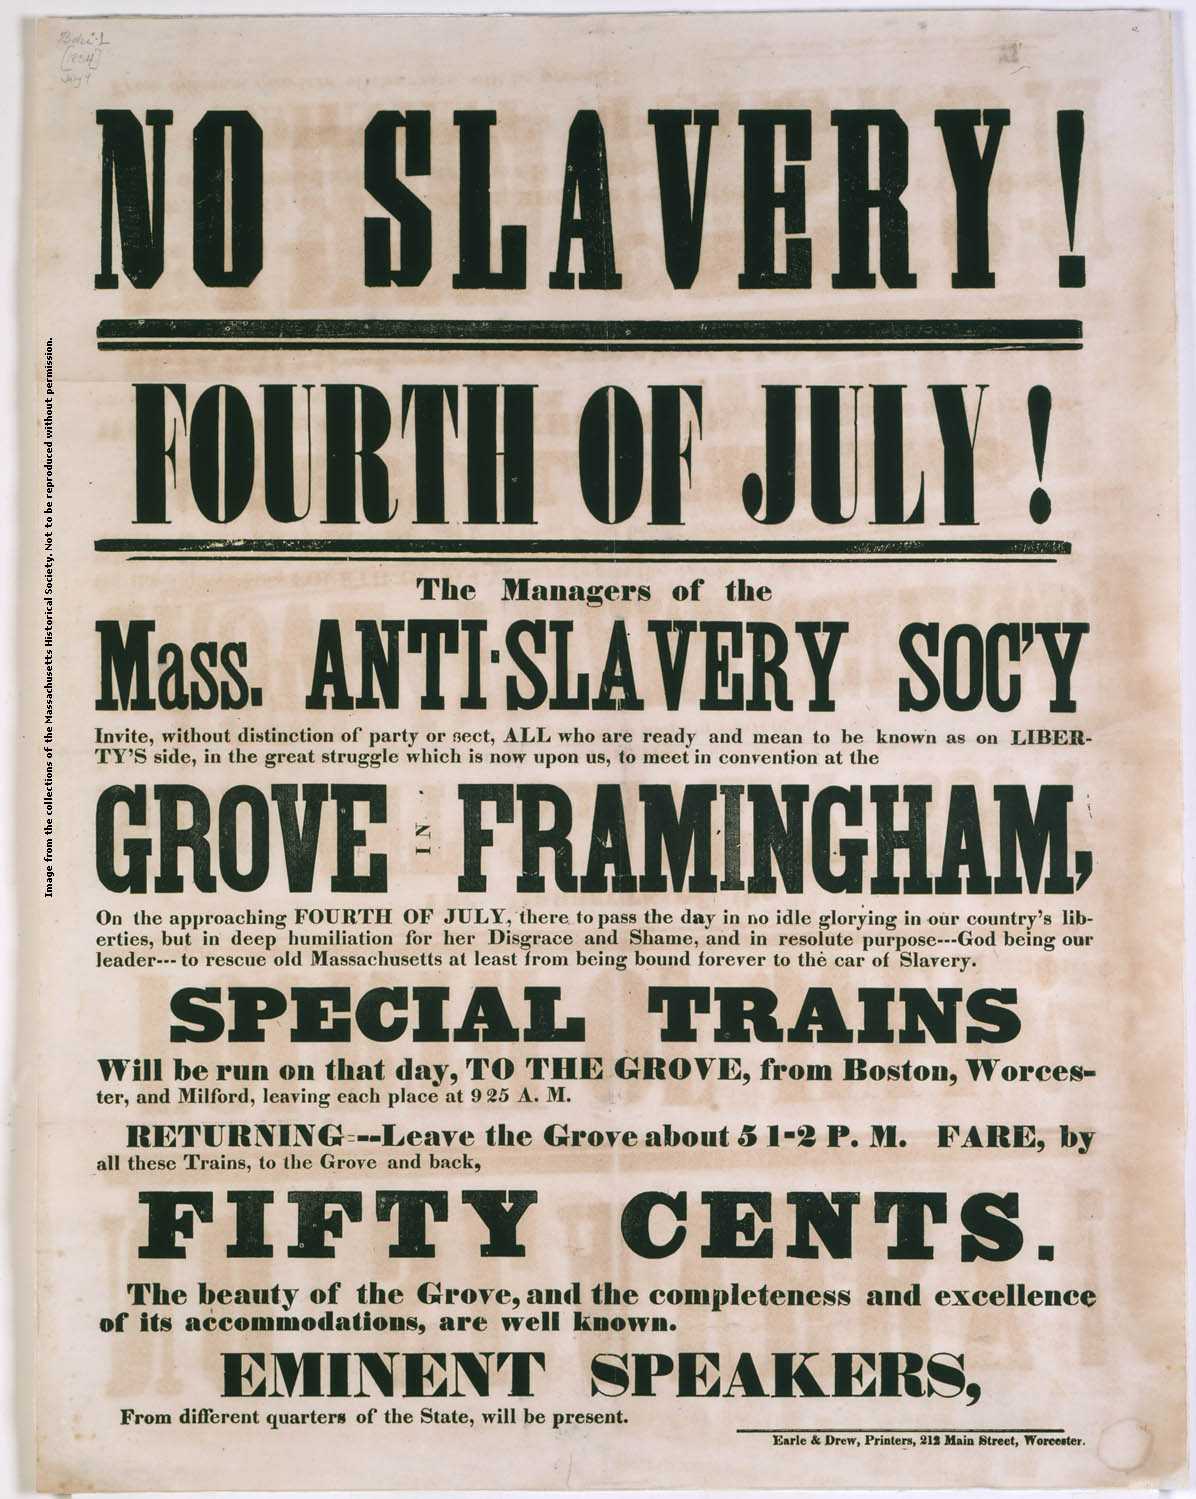 Image of broadside that reads "No slavery!"